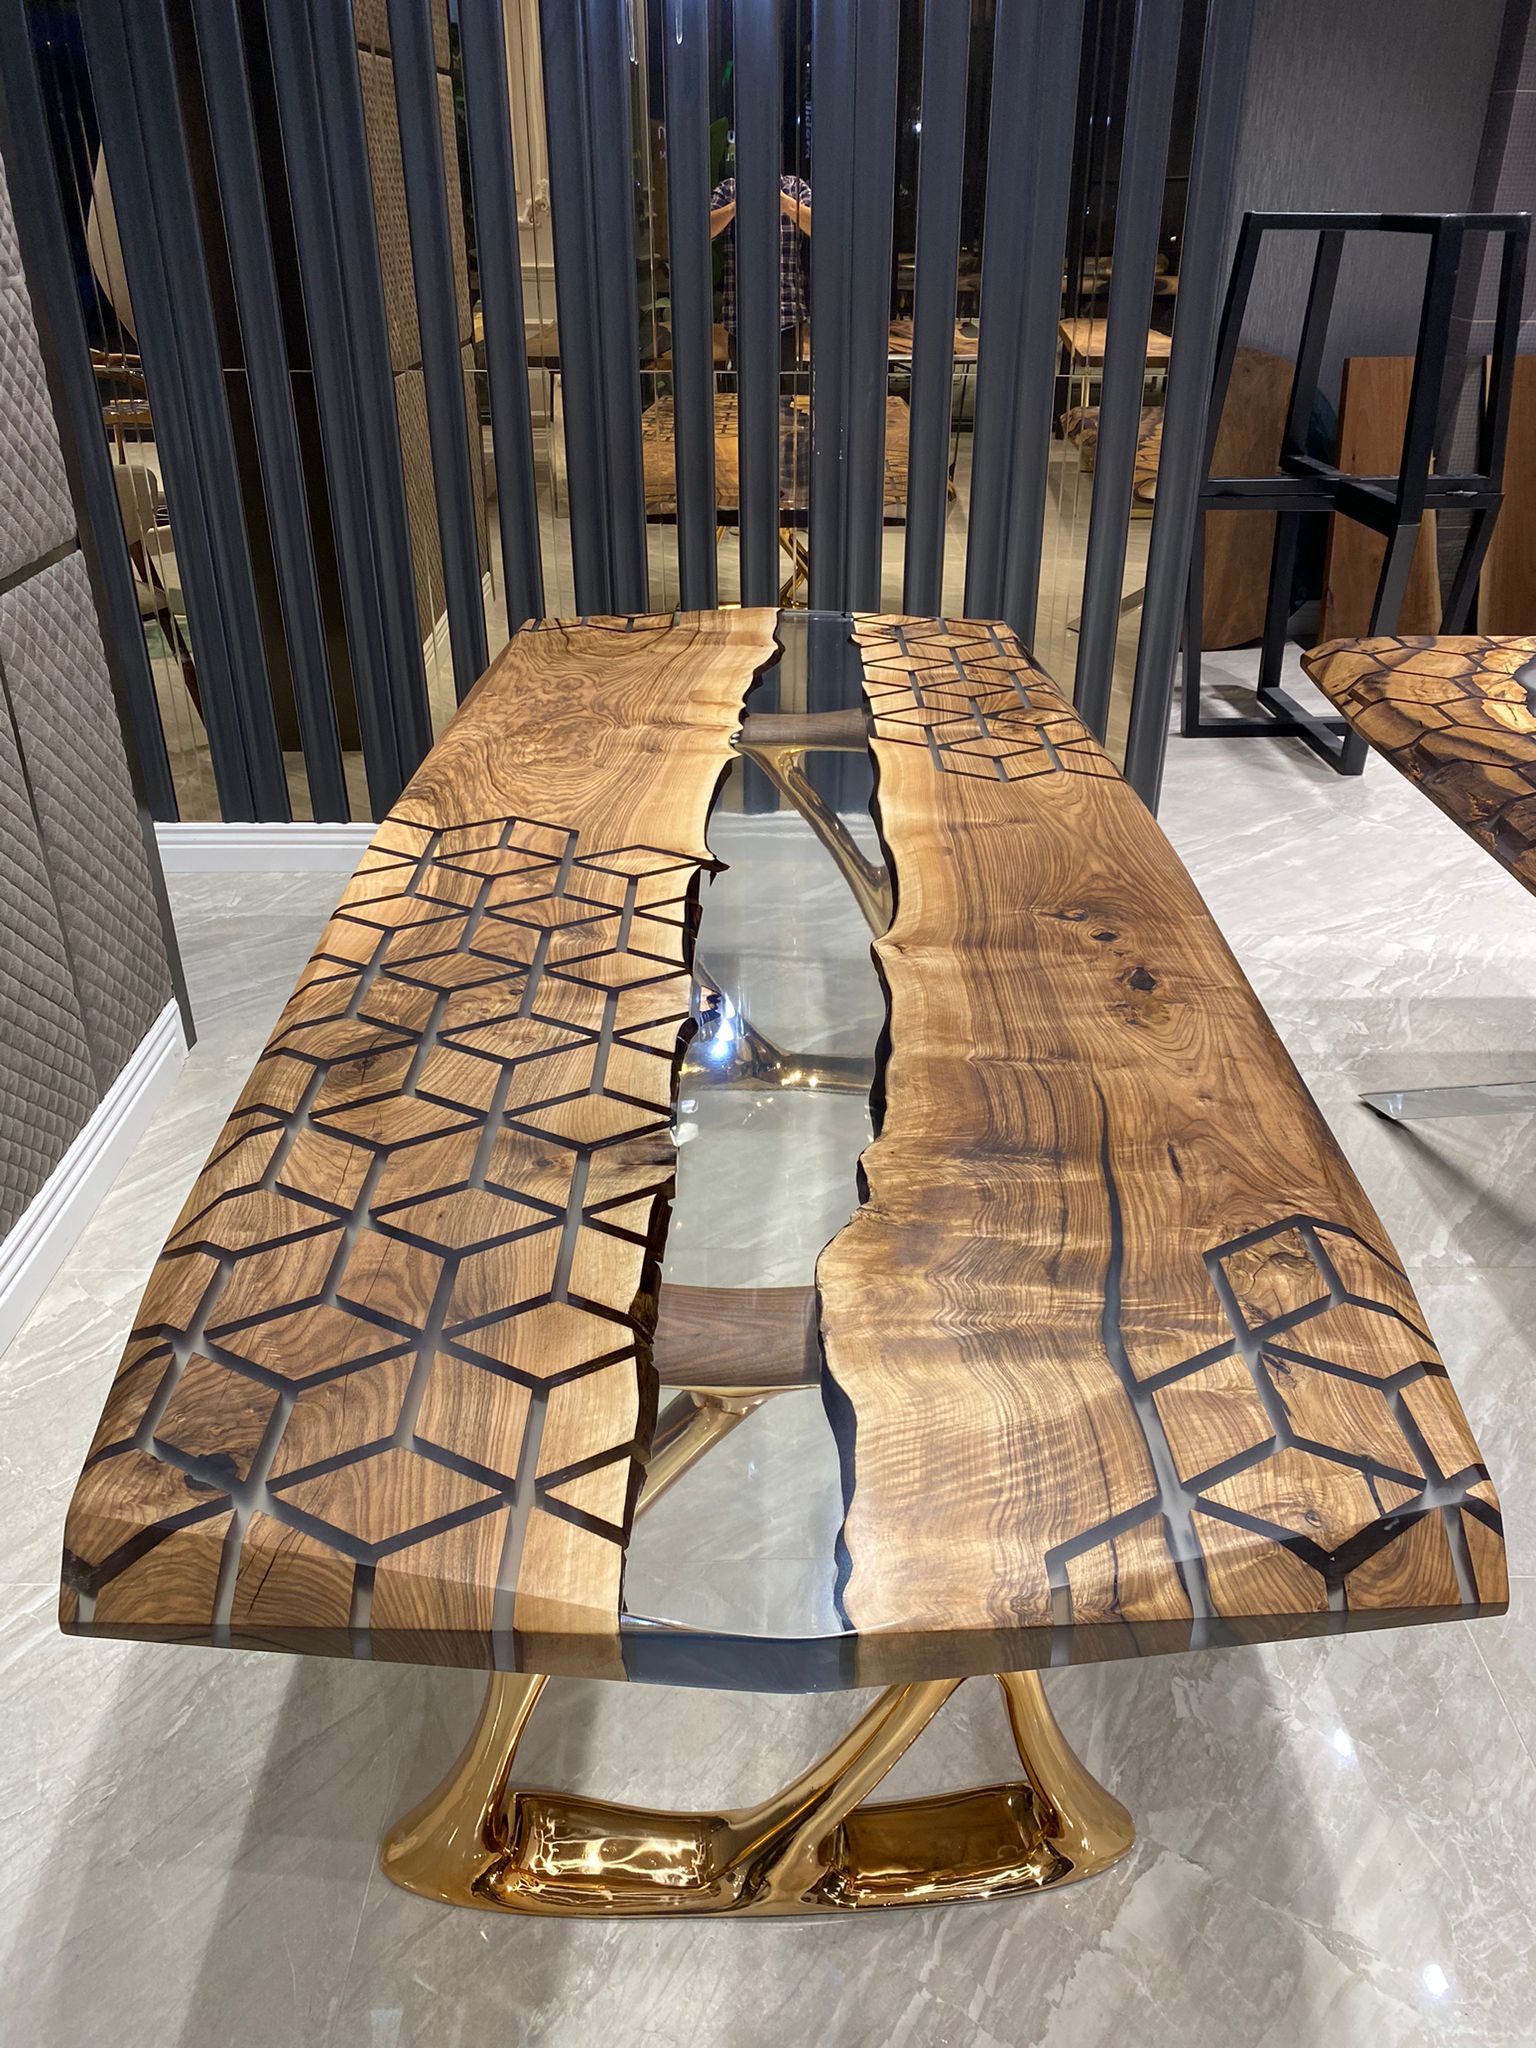 Epoxy table in DNA design, epoxy dining table, epoxy dining table austria, epoxy dining table walnut, epoxy dining table hexagon, epoxy river table, river table, river table hexagon, epoxy resin table, custom-made furniture, exclusive tables, epoxy table, johannes forkl, forkl, oh my deer, omd, epoxy table buy, epoxy table buy austria, epoxy tables, epoxy tables, epoxy table river, epoxy dining table, epoxy table walnut wood